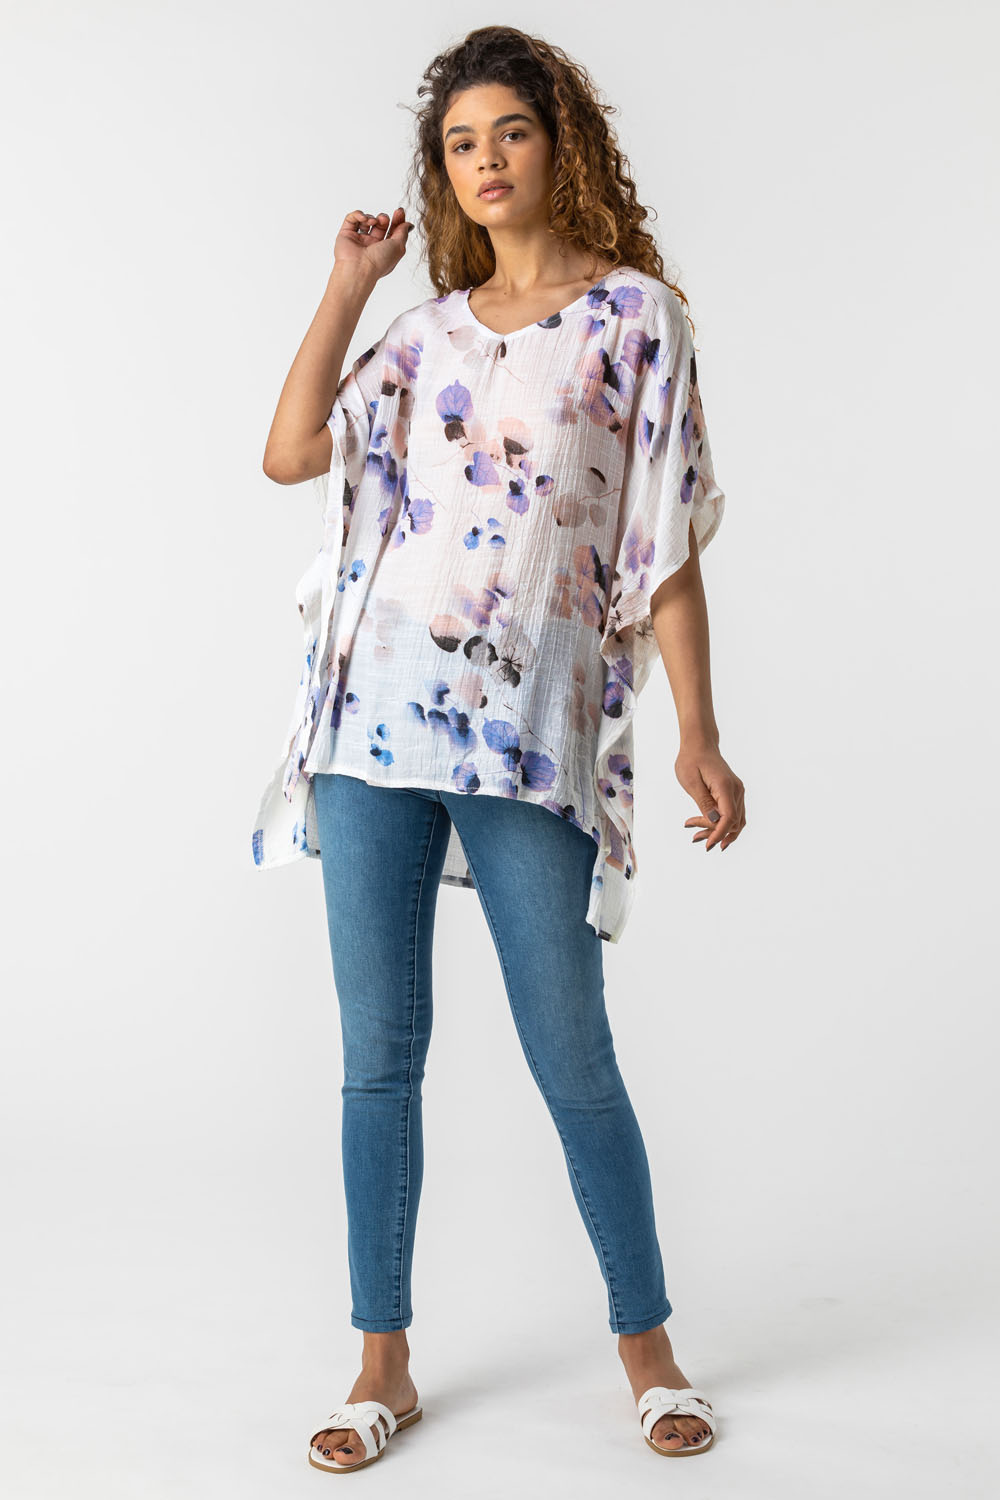 Blue Abstract Floral Print Tunic Top, Image 3 of 5